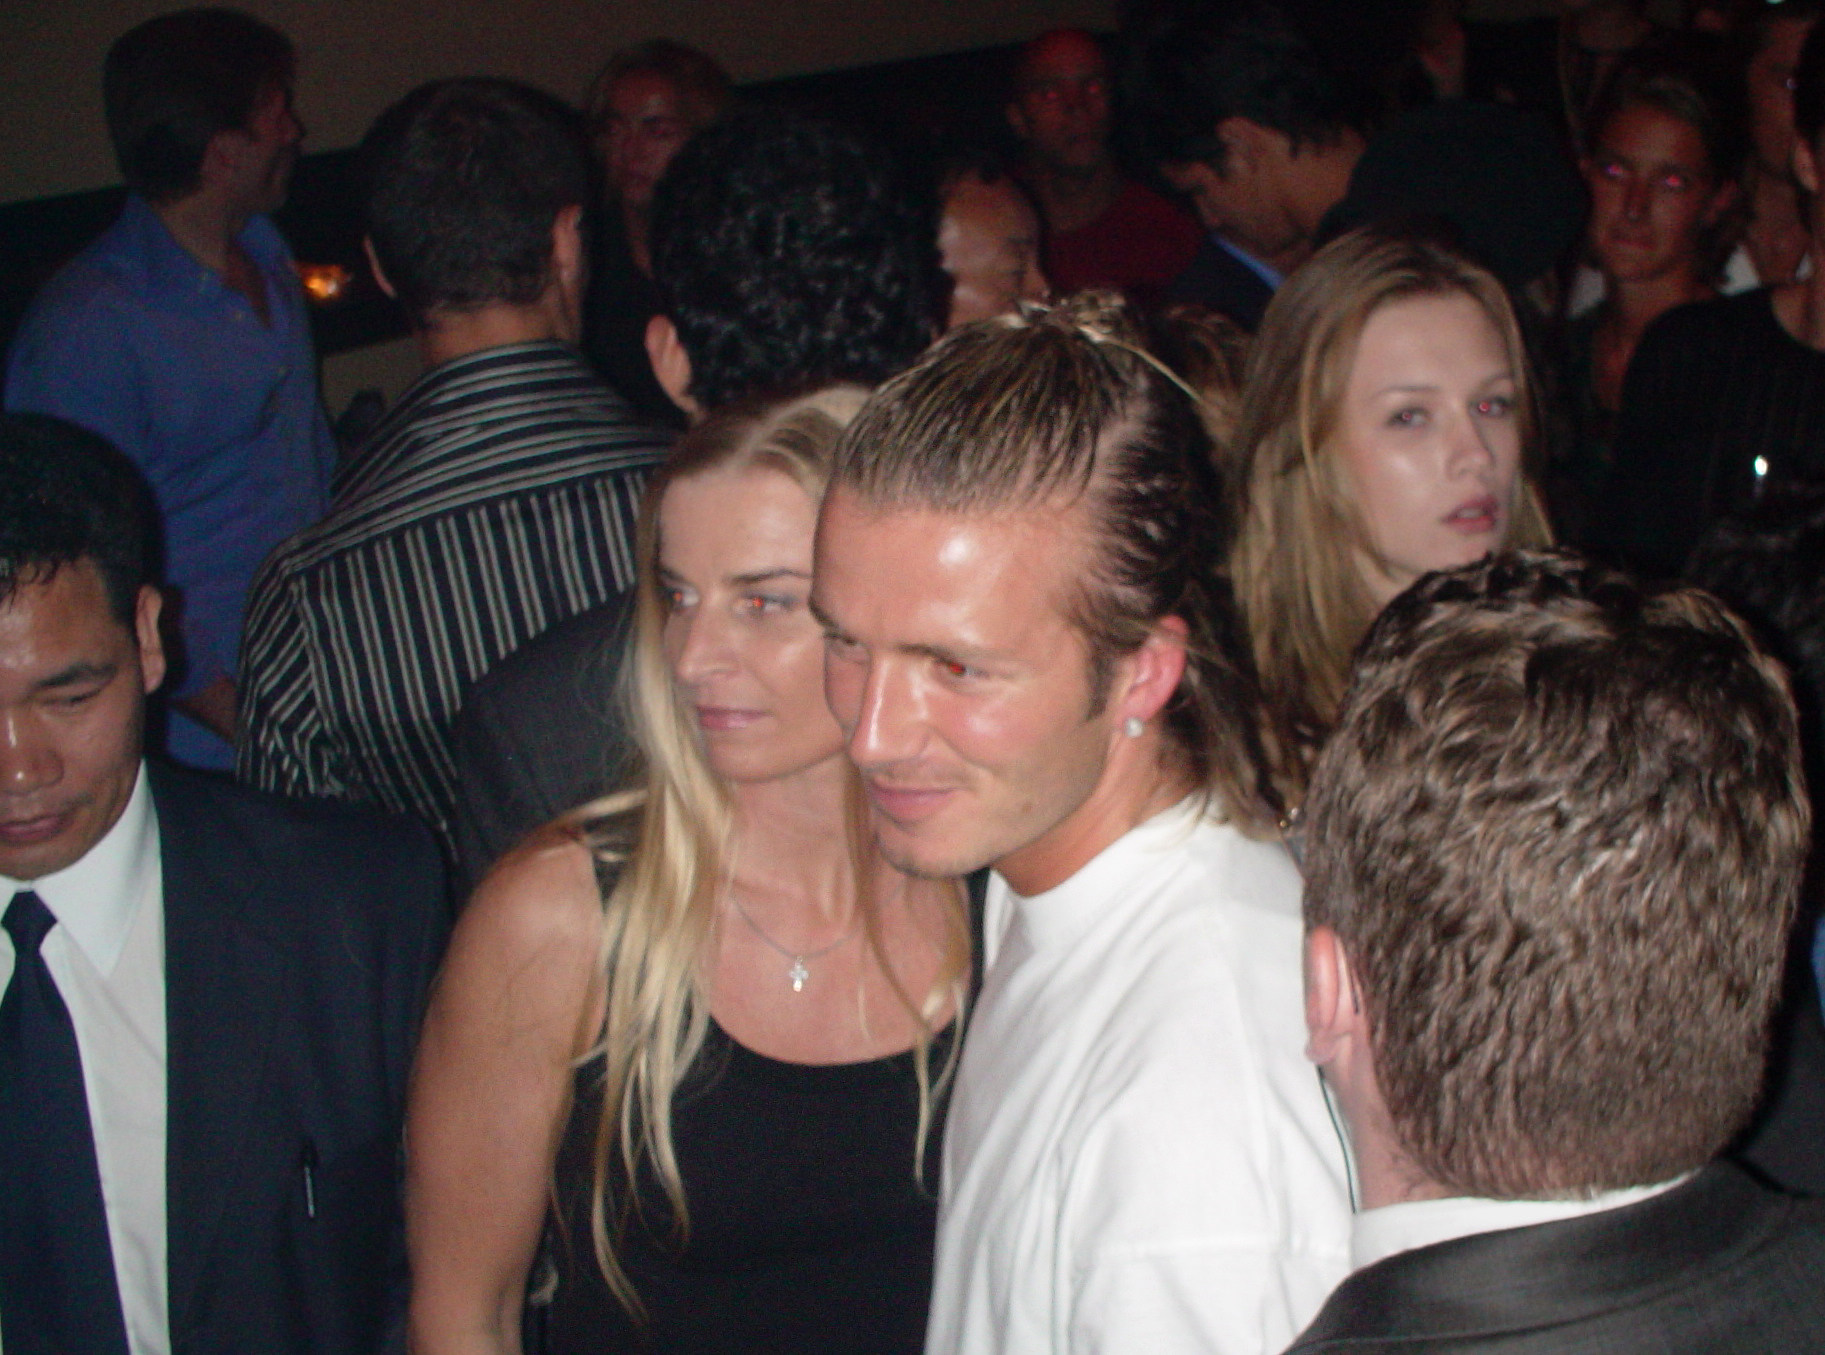 Footballer David Beckham is surrounded by beauties and bodyguards at a party in Dragon-i in August 2003. Photo: SCMP